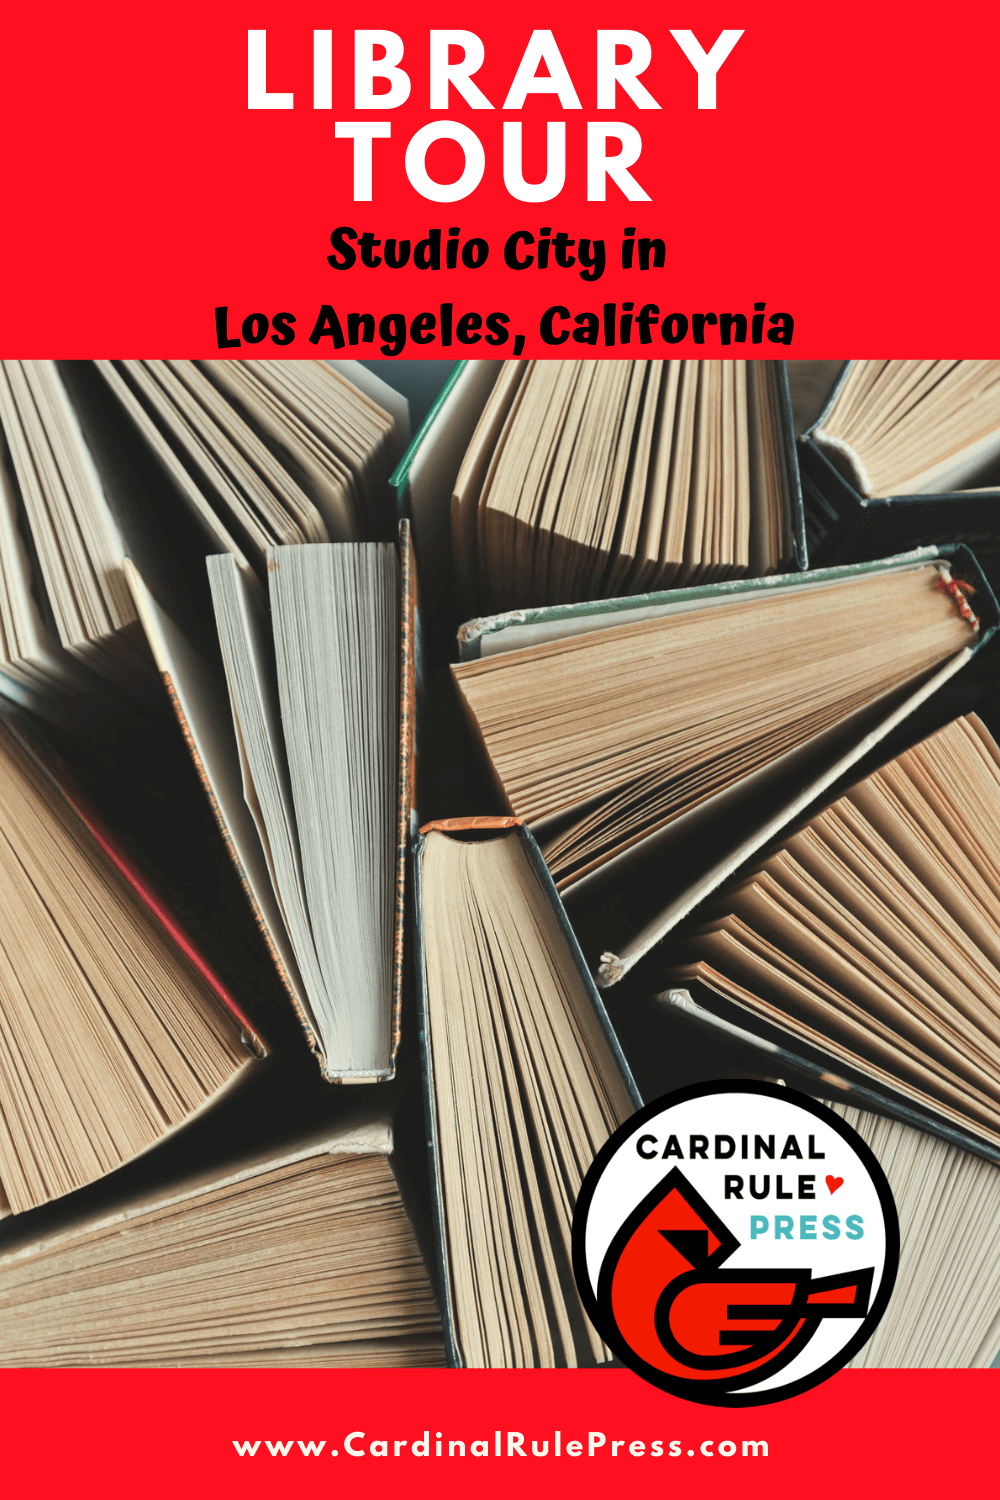 Summer Library Tour: Los Angeles Public Library in Studio City-We got to take an inside look into these creative spaces that house our favorite things---books and books and readers!
#SummerTour #Library #LibraryTour